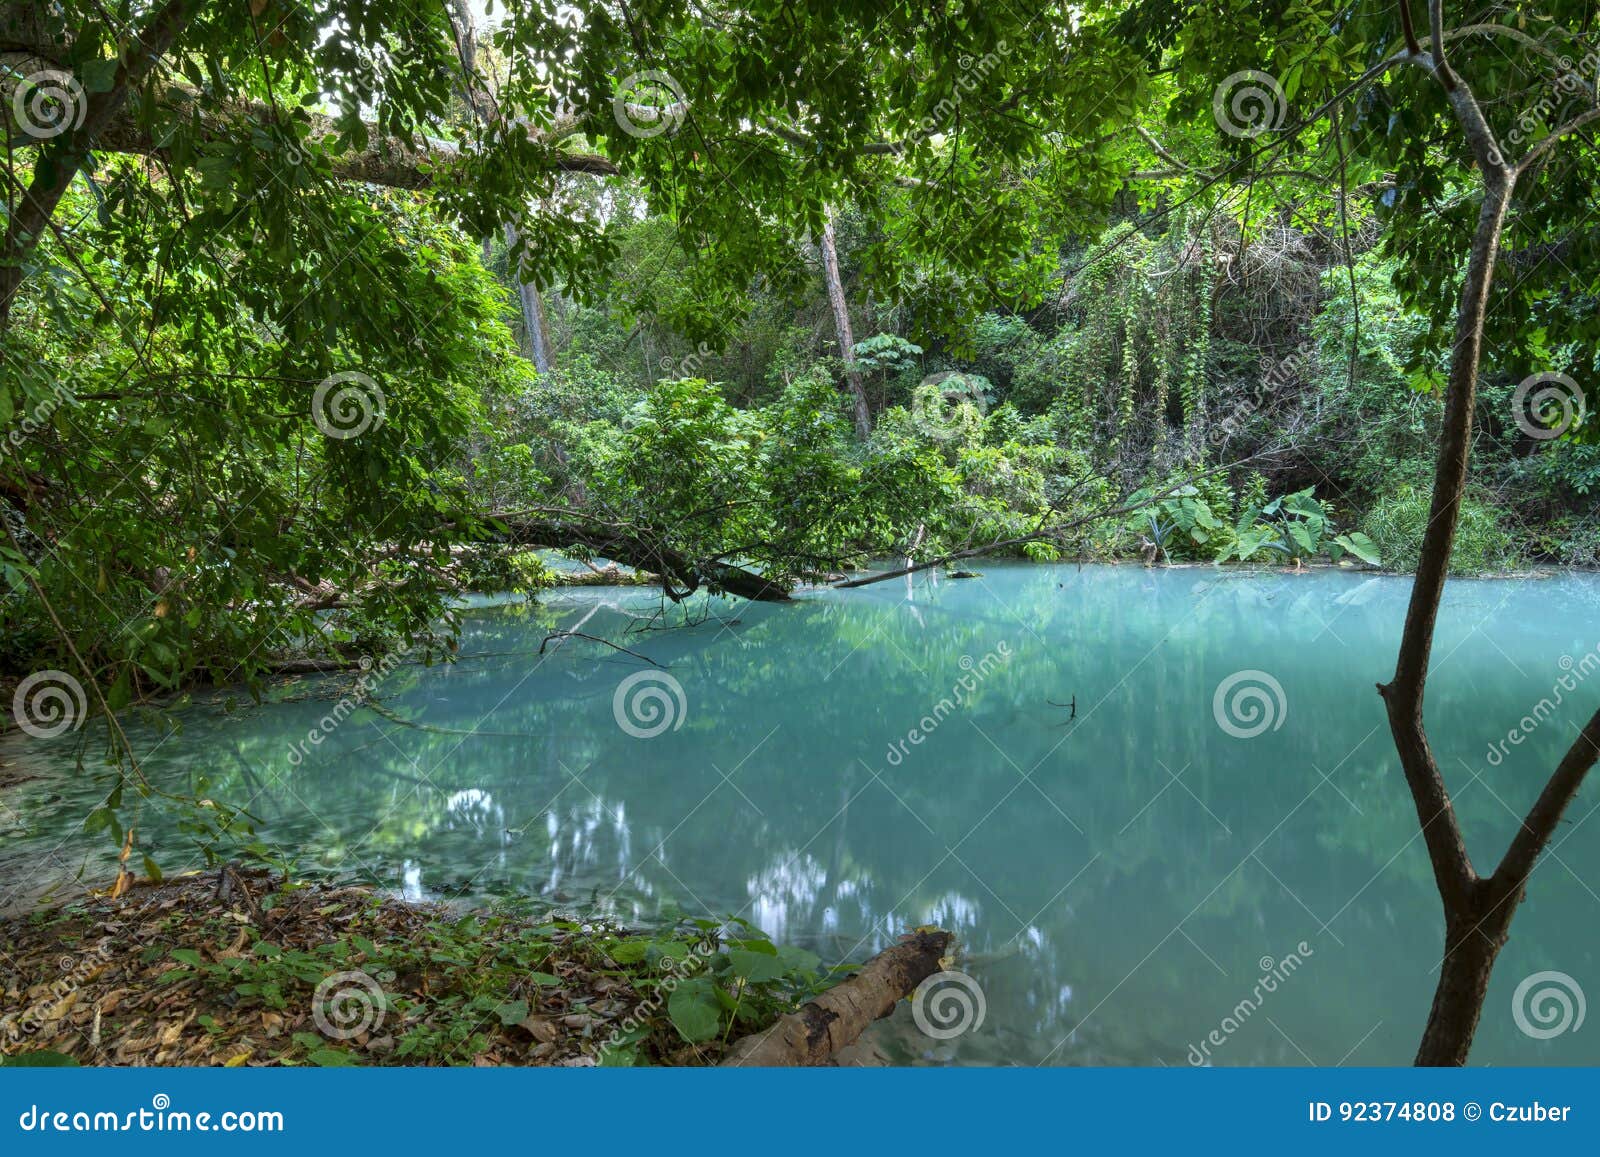 turquoise blue water in chiapas, mexico jungle